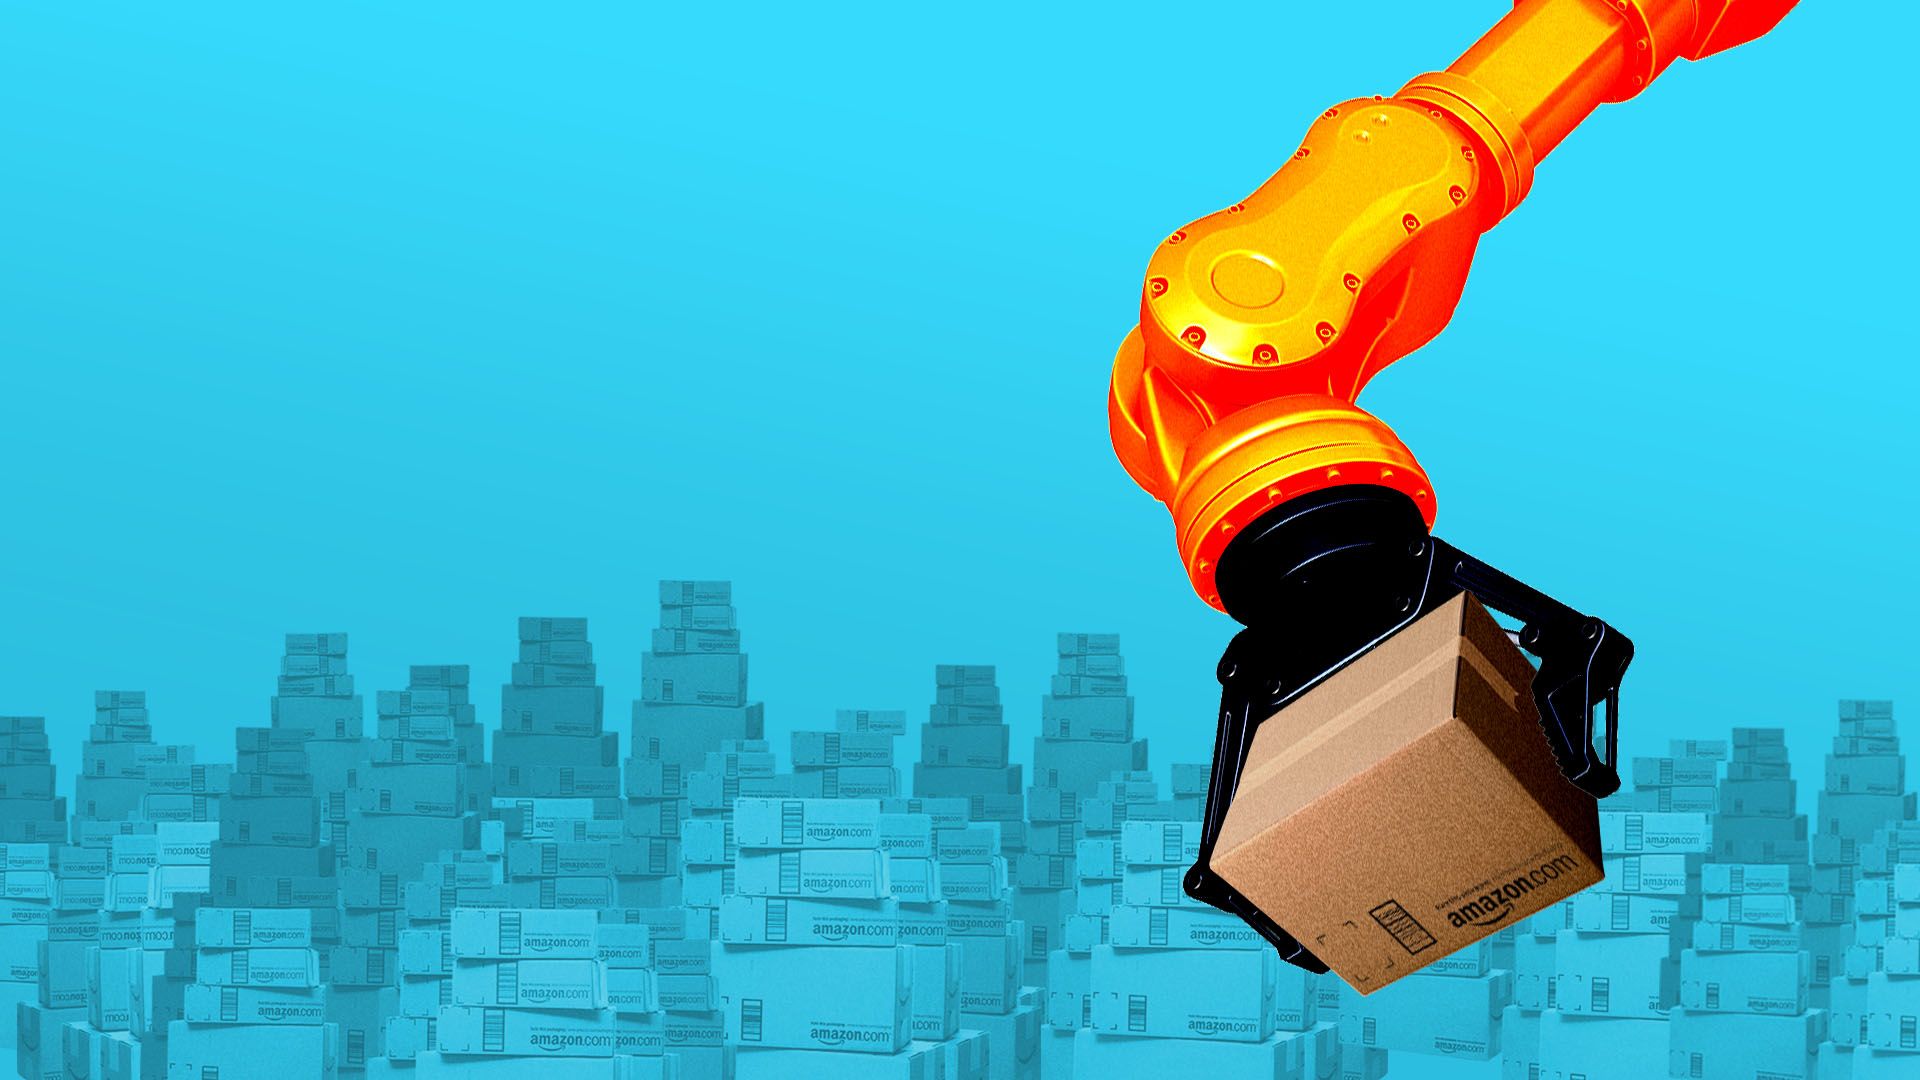 Illustration of a mechanical arm moving a mountain of Amazon boxes